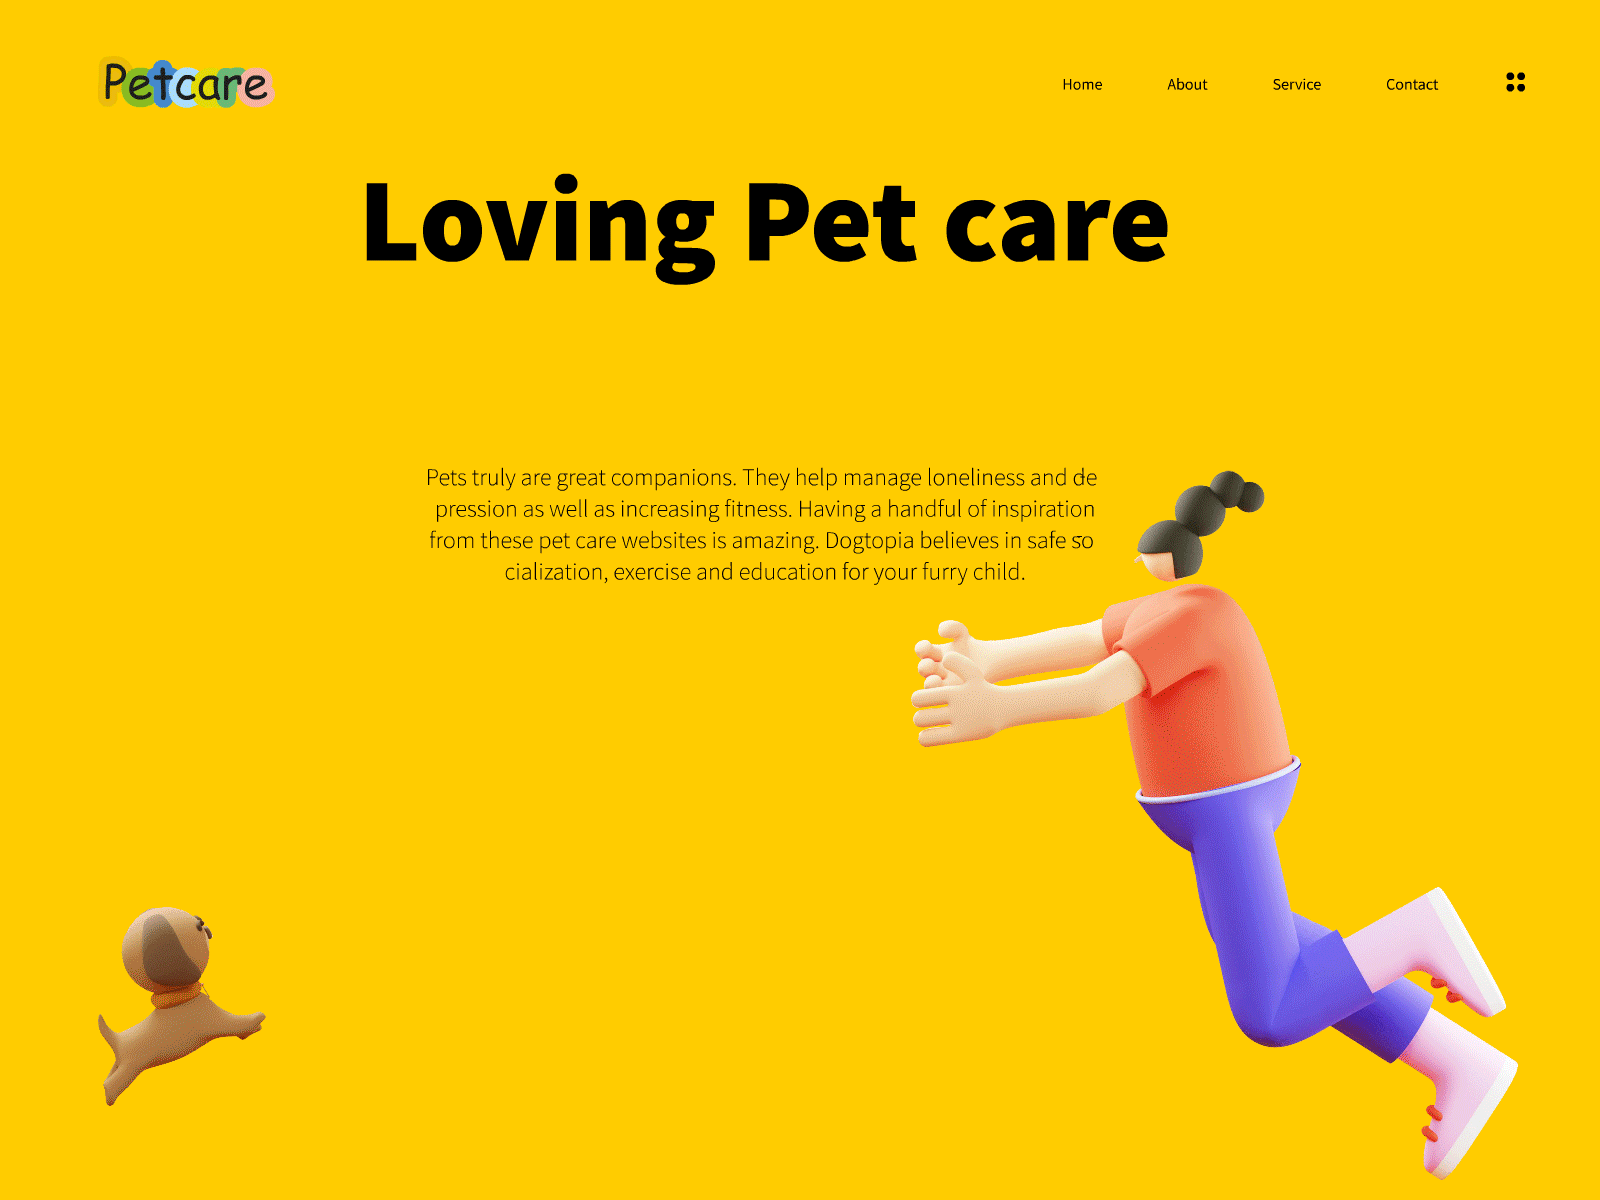 Pet care - Hero Section